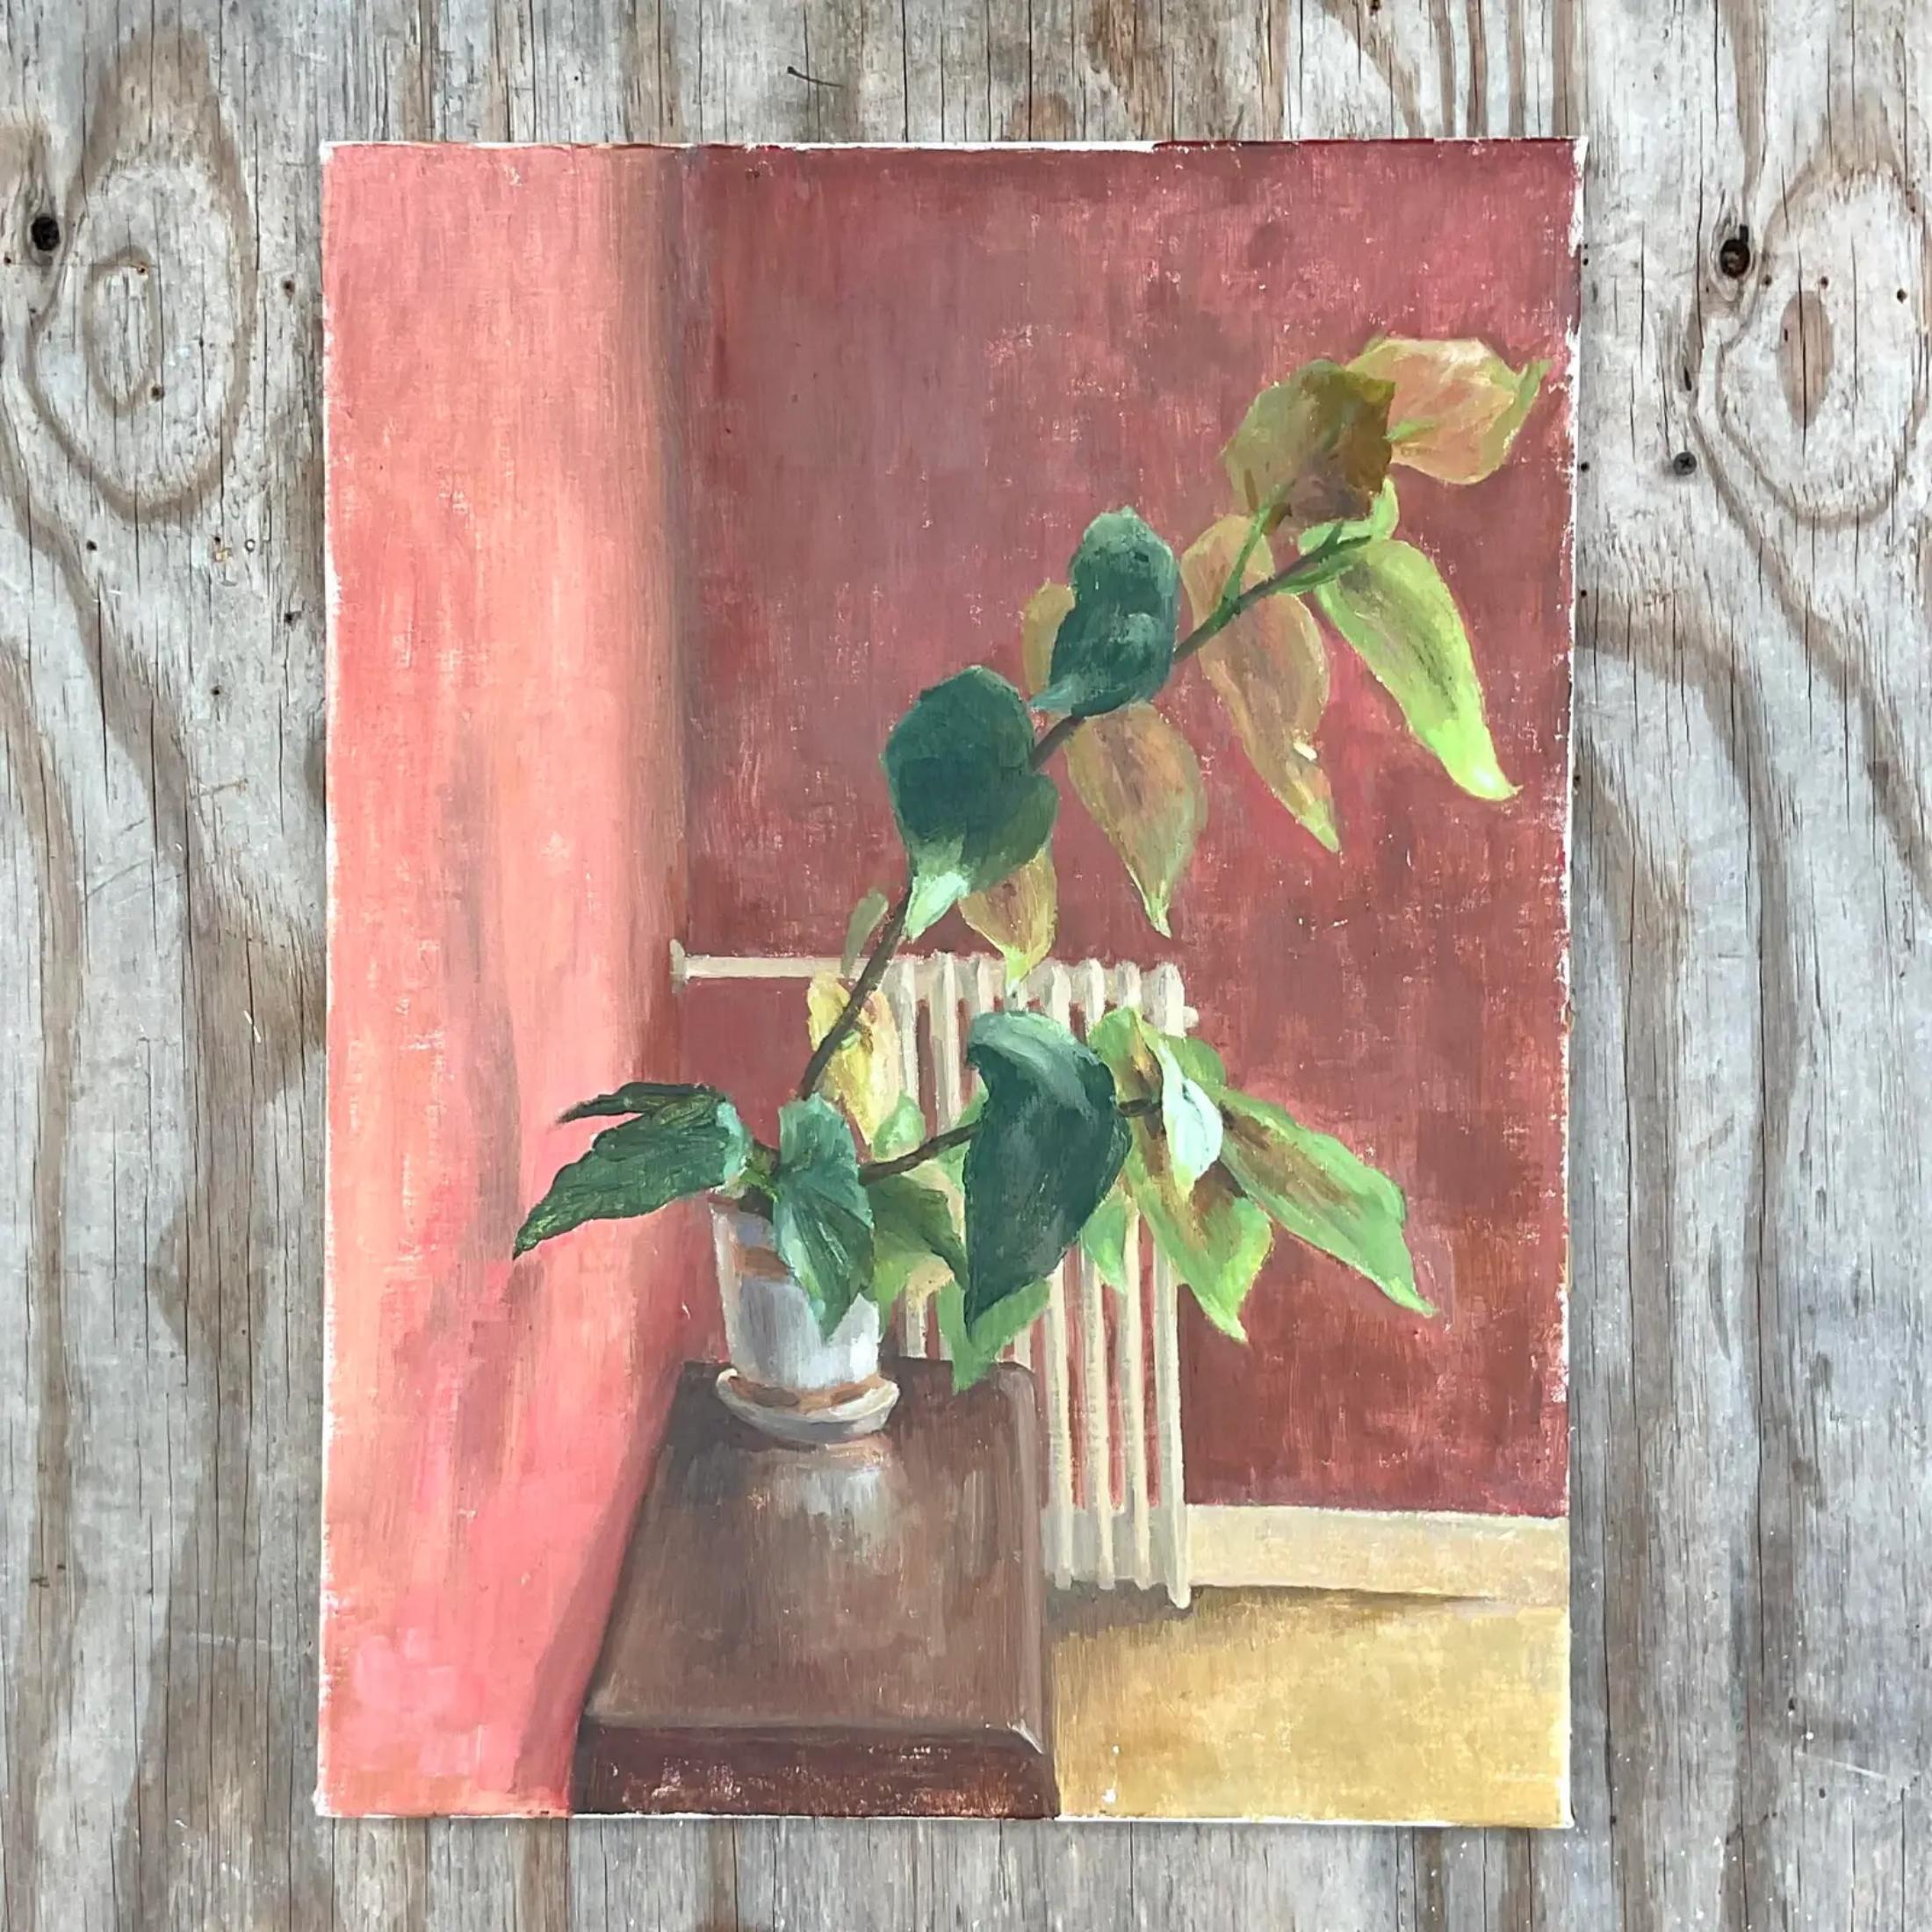 A fabulous vintage Boho original oil painting on canvas. A chic composition of branches in a vase. Beautiful use of light and shadow. Signed by the artist. Acquired from a Palm Beach estate